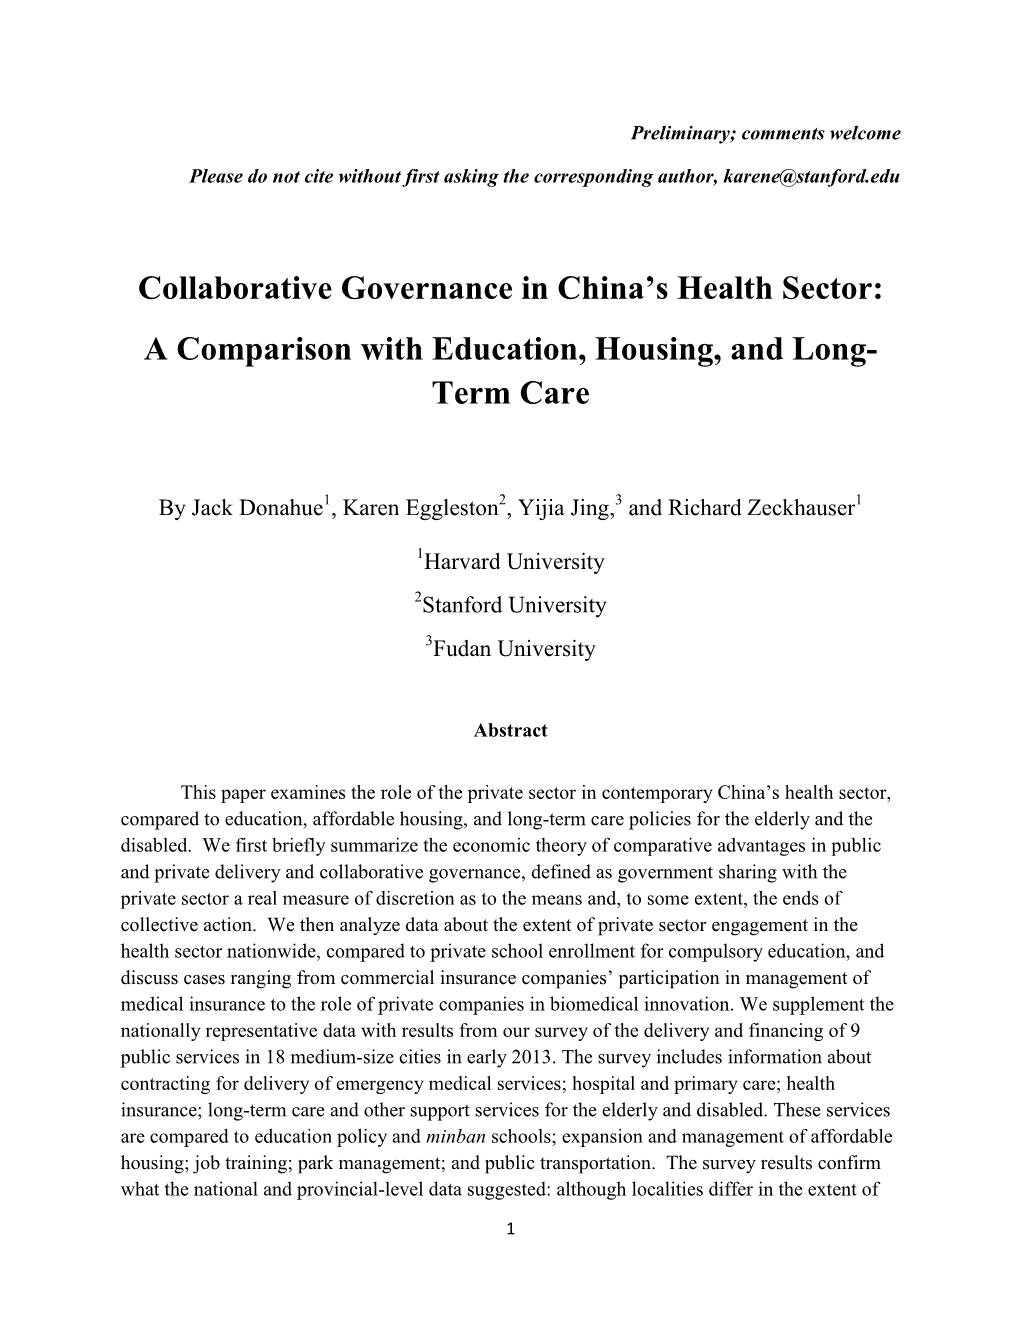 Collaborative Governance in China's Health Sector